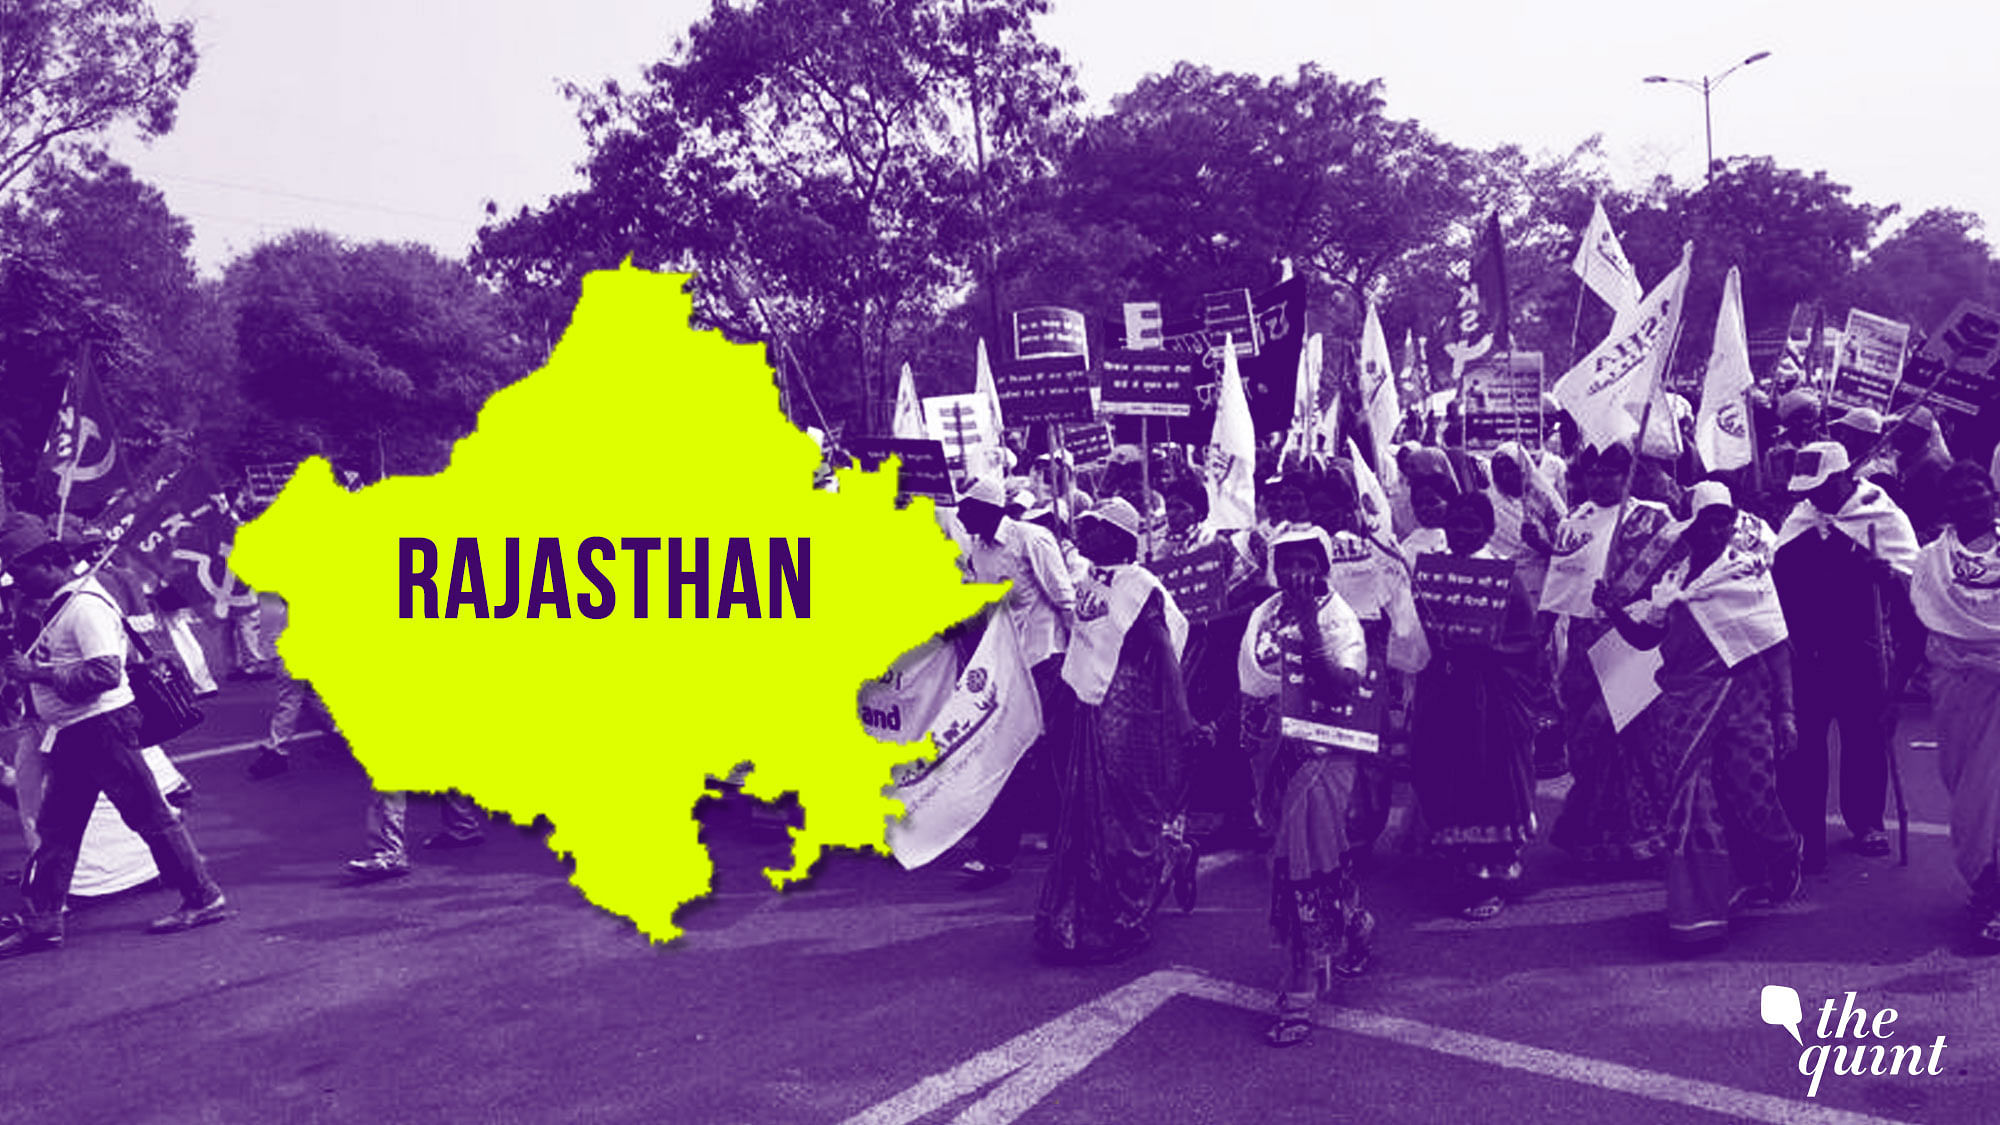 Generic image of farmers’ march and the Rajasthan map used for representational purposes only.